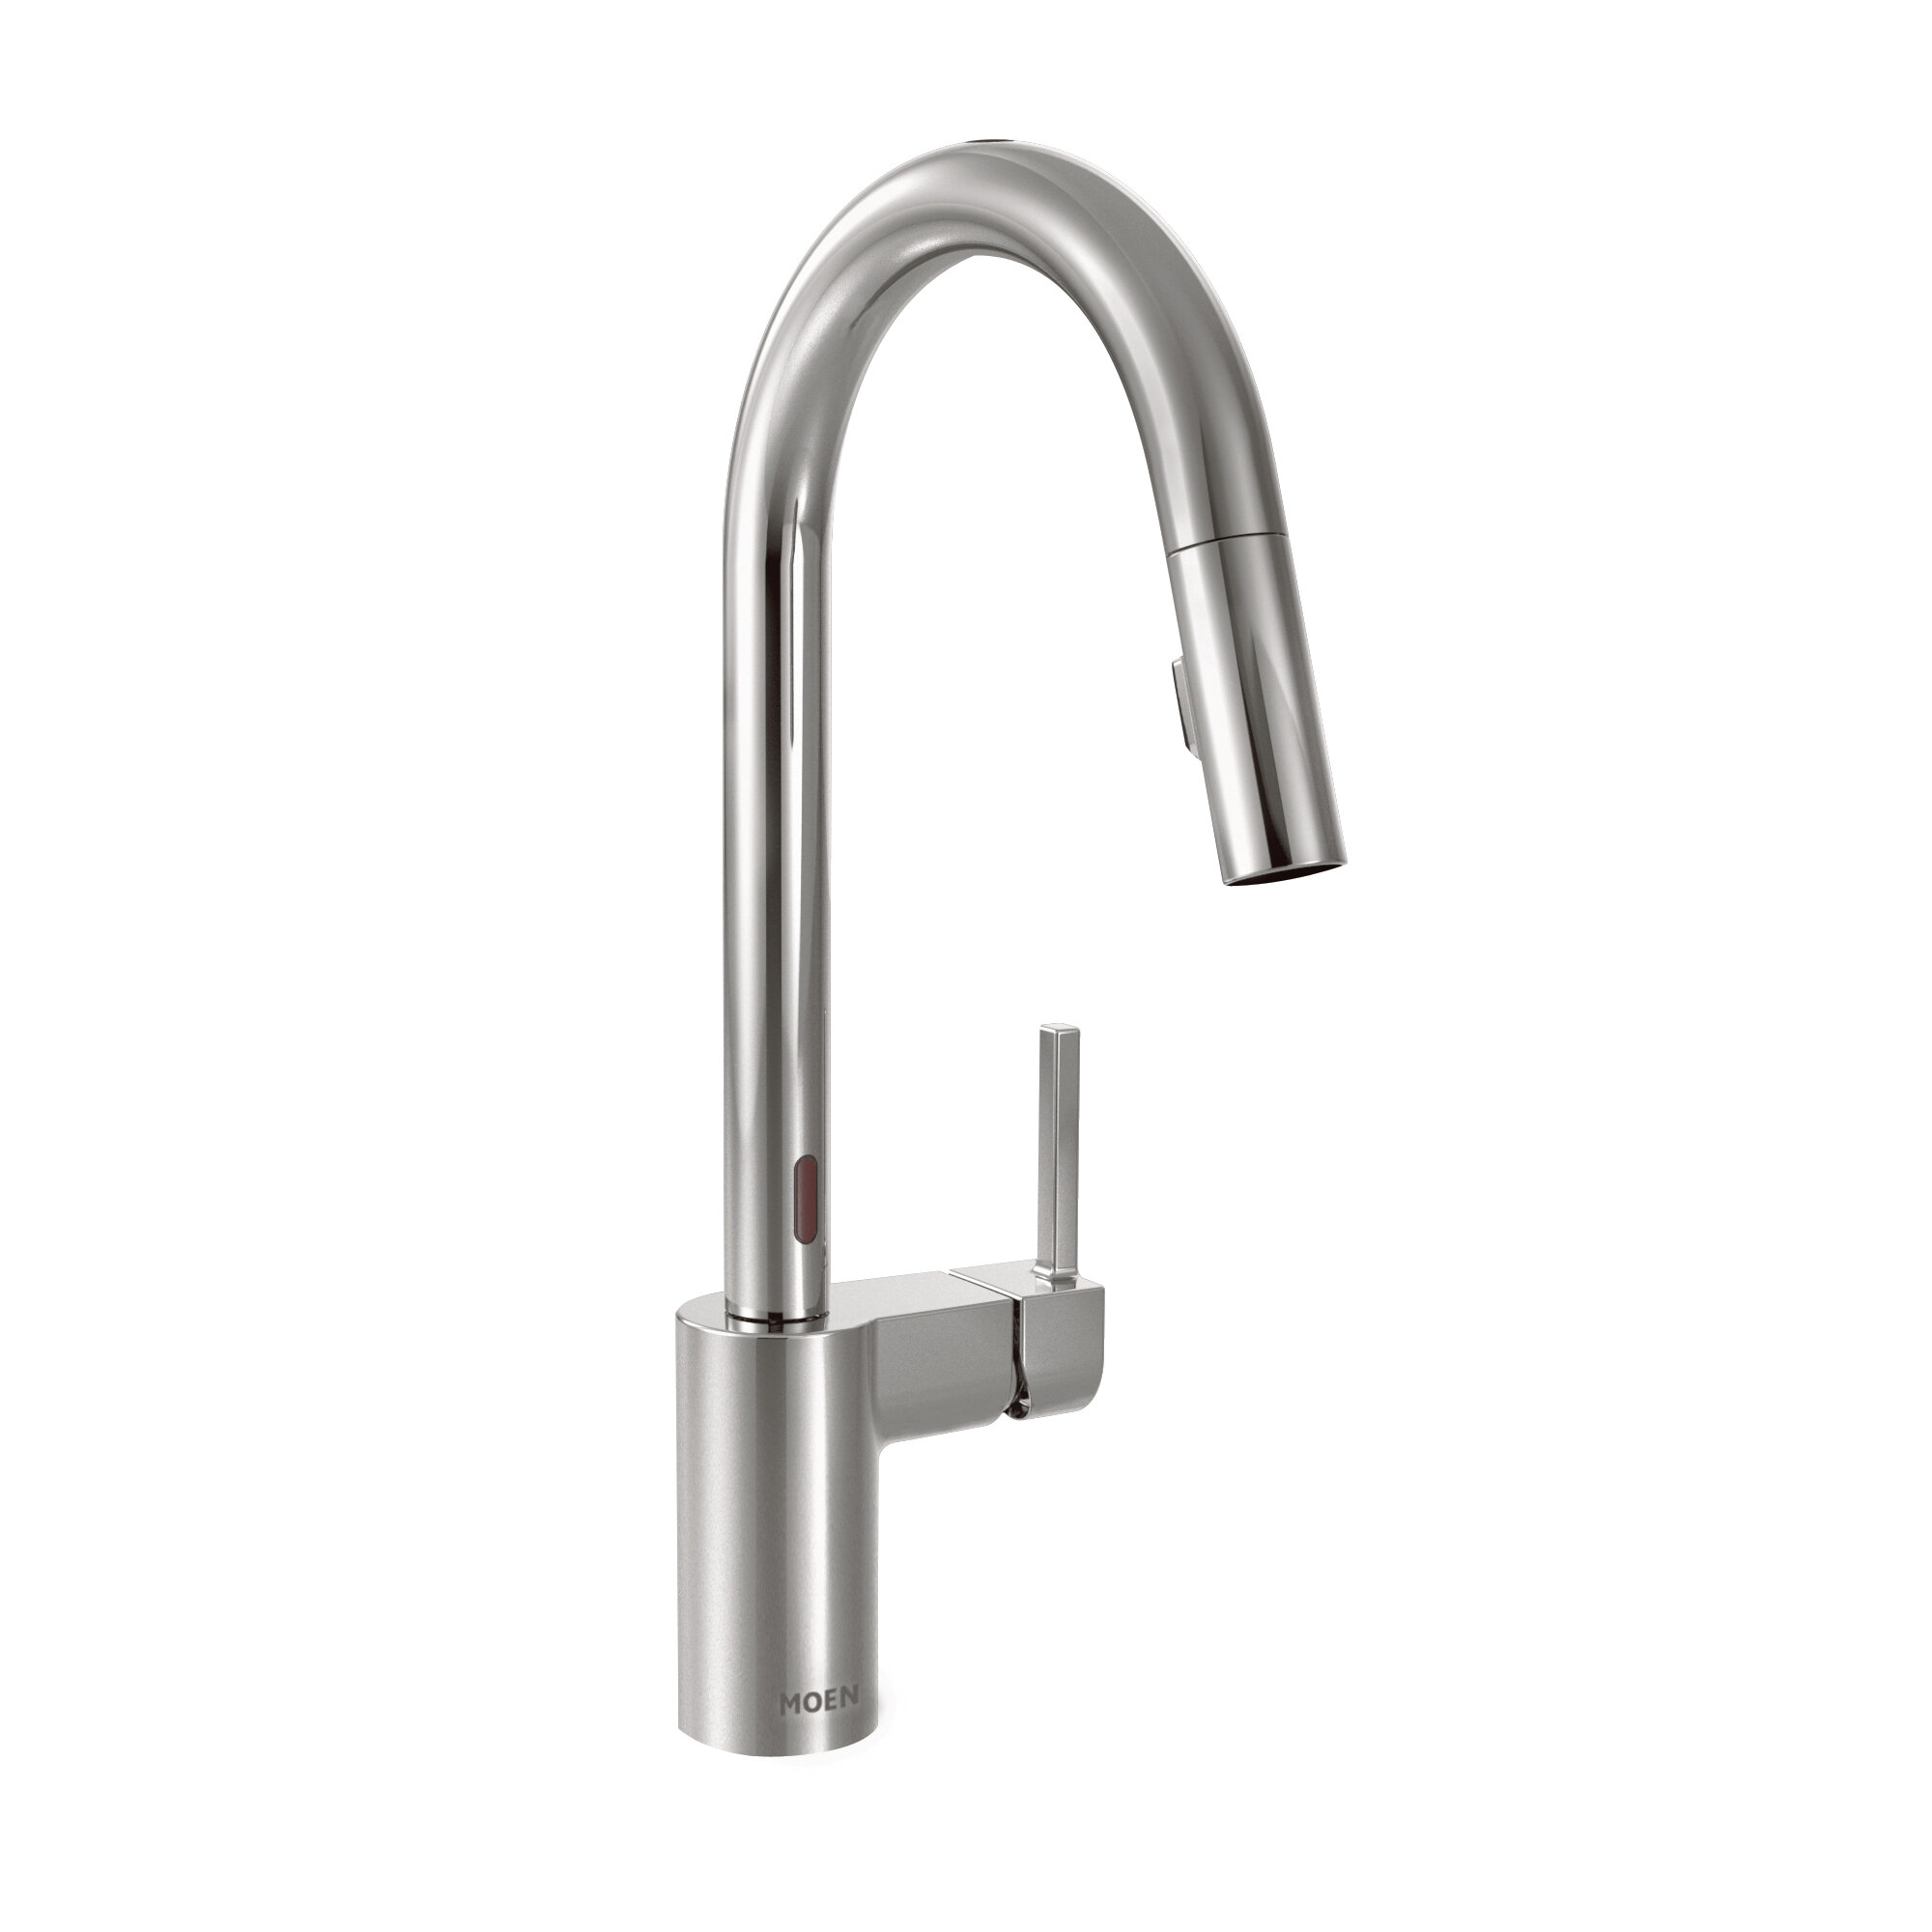 Moen Align Pull Down Single Handle Kitchen Faucet With Motionsense Reviews Wayfair